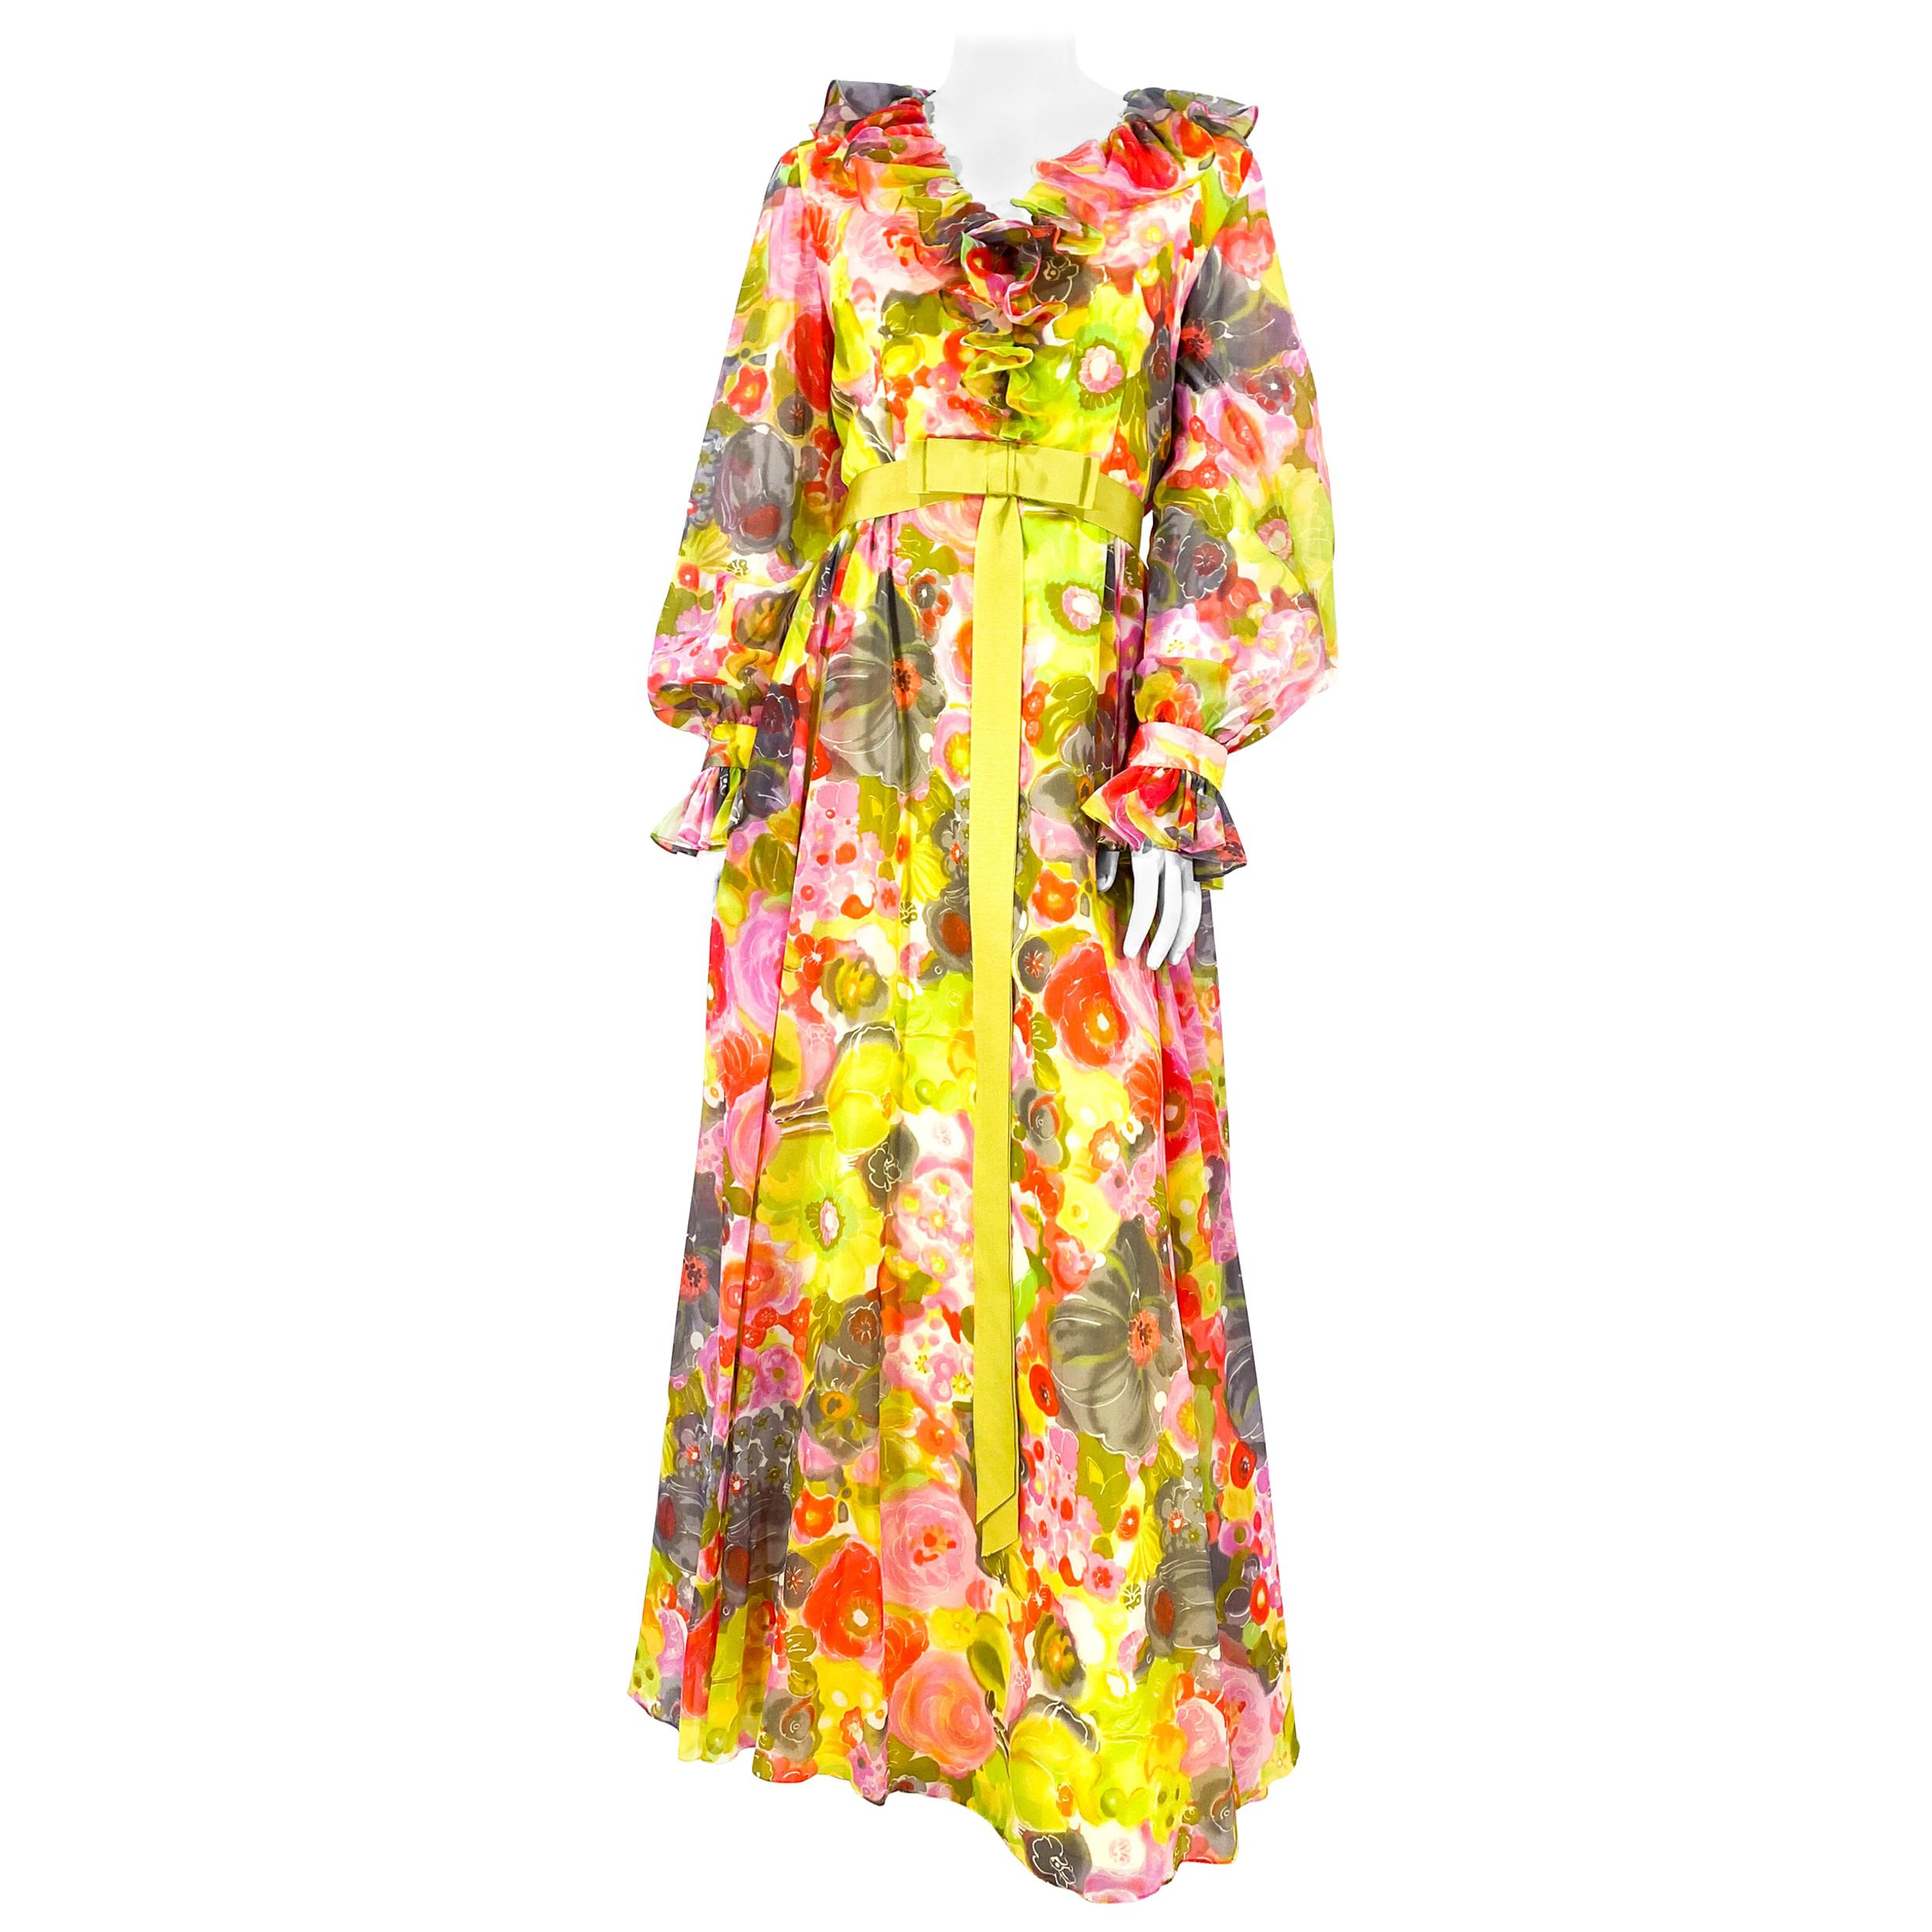 1970s Multi-colored Floral Printed Chiffon Dress